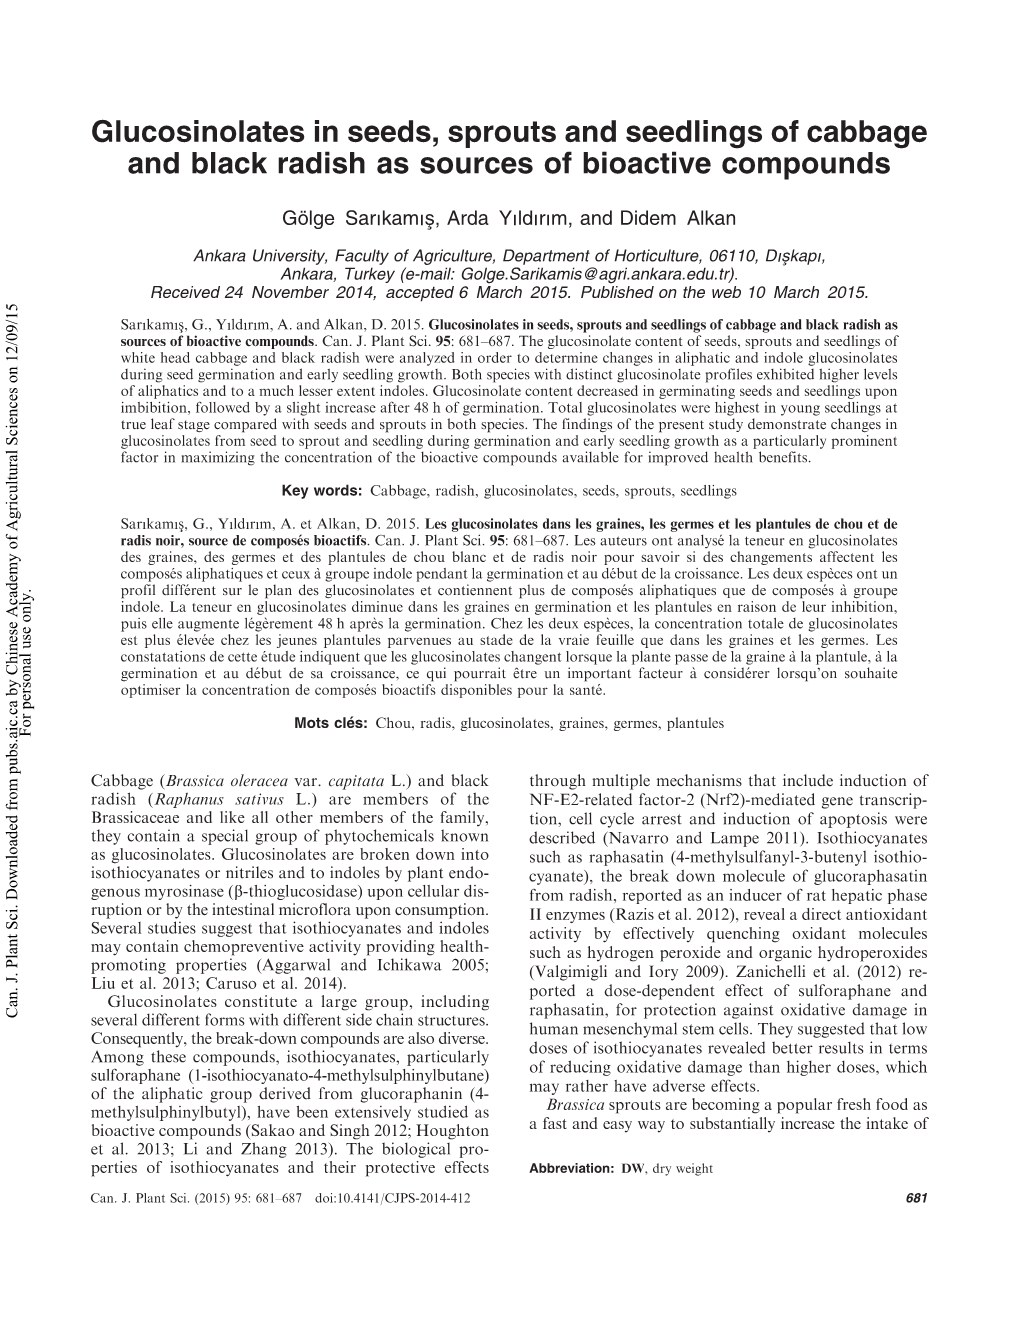 Glucosinolates in Seeds, Sprouts and Seedlings of Cabbage and Black Radish As Sources of Bioactive Compounds